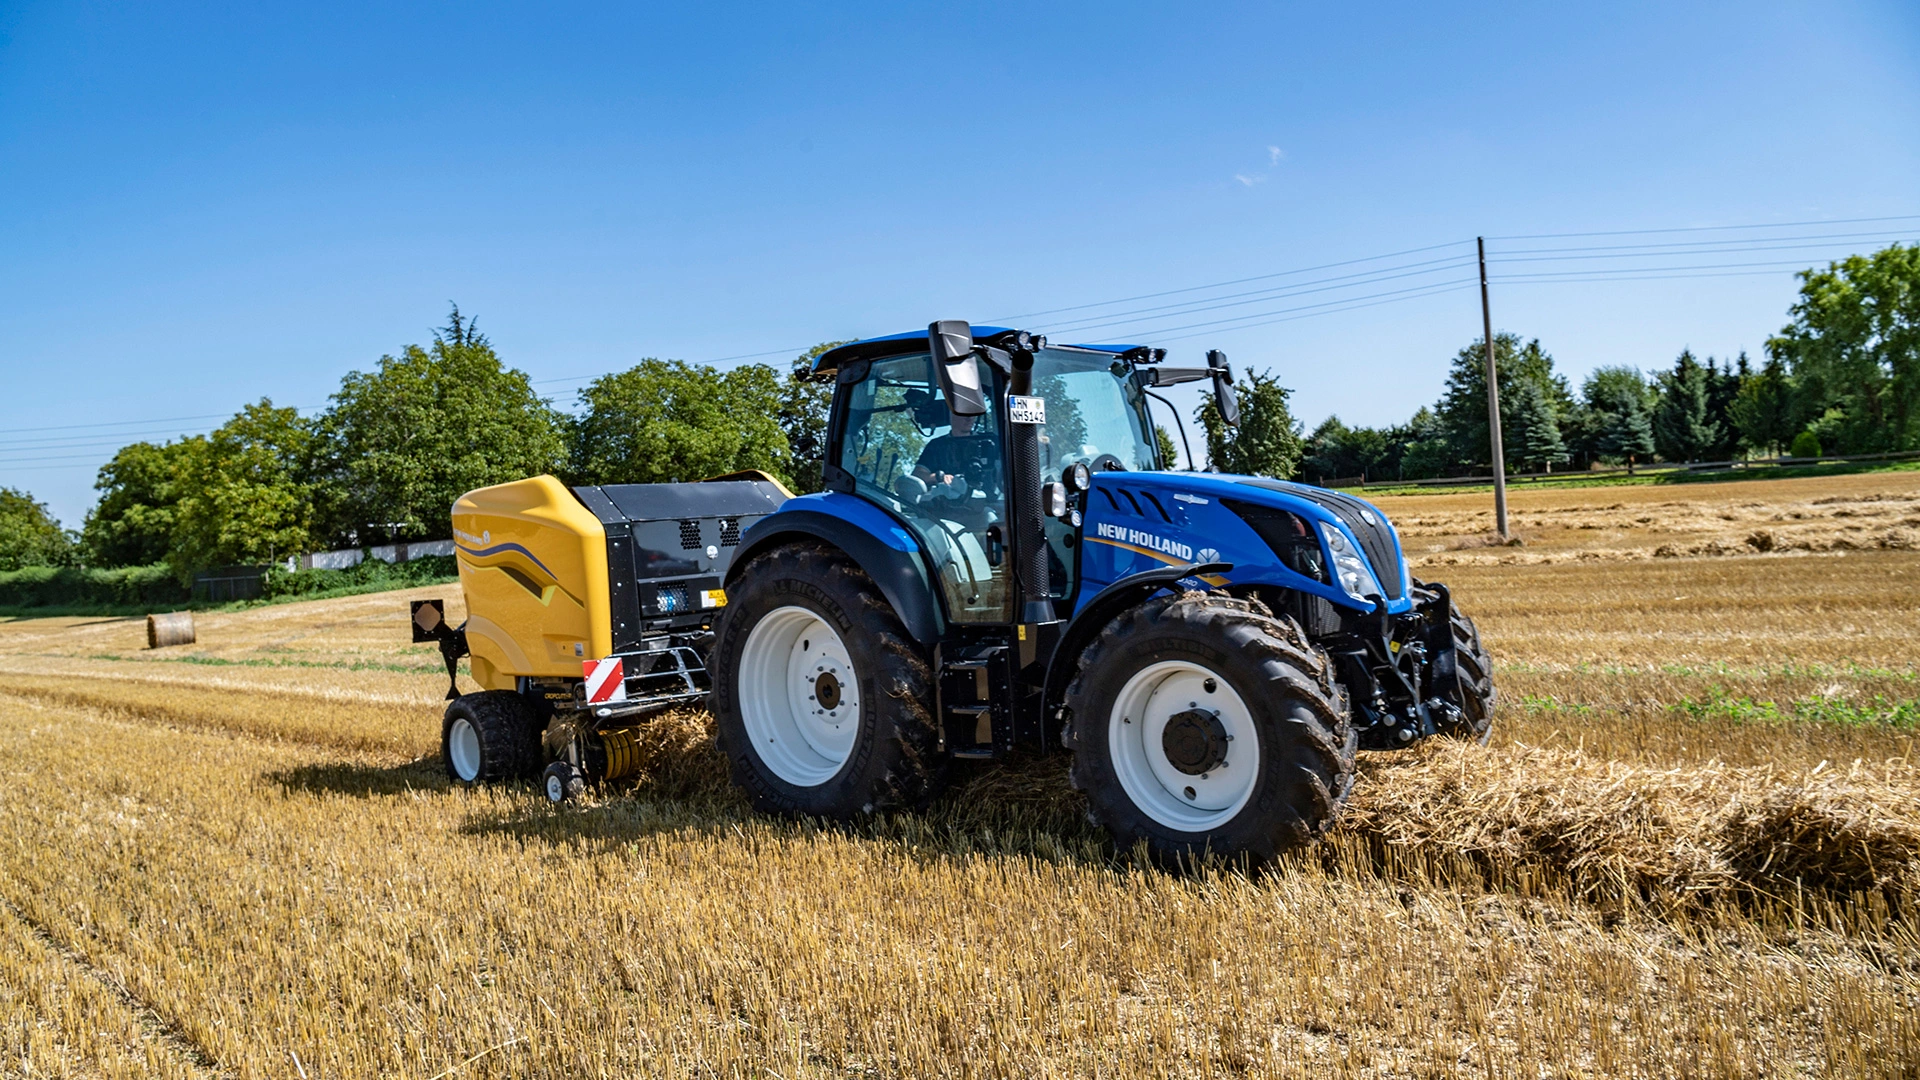 New Holland T5 tractor with a Roll Baler 125 in a harvested wheat field.